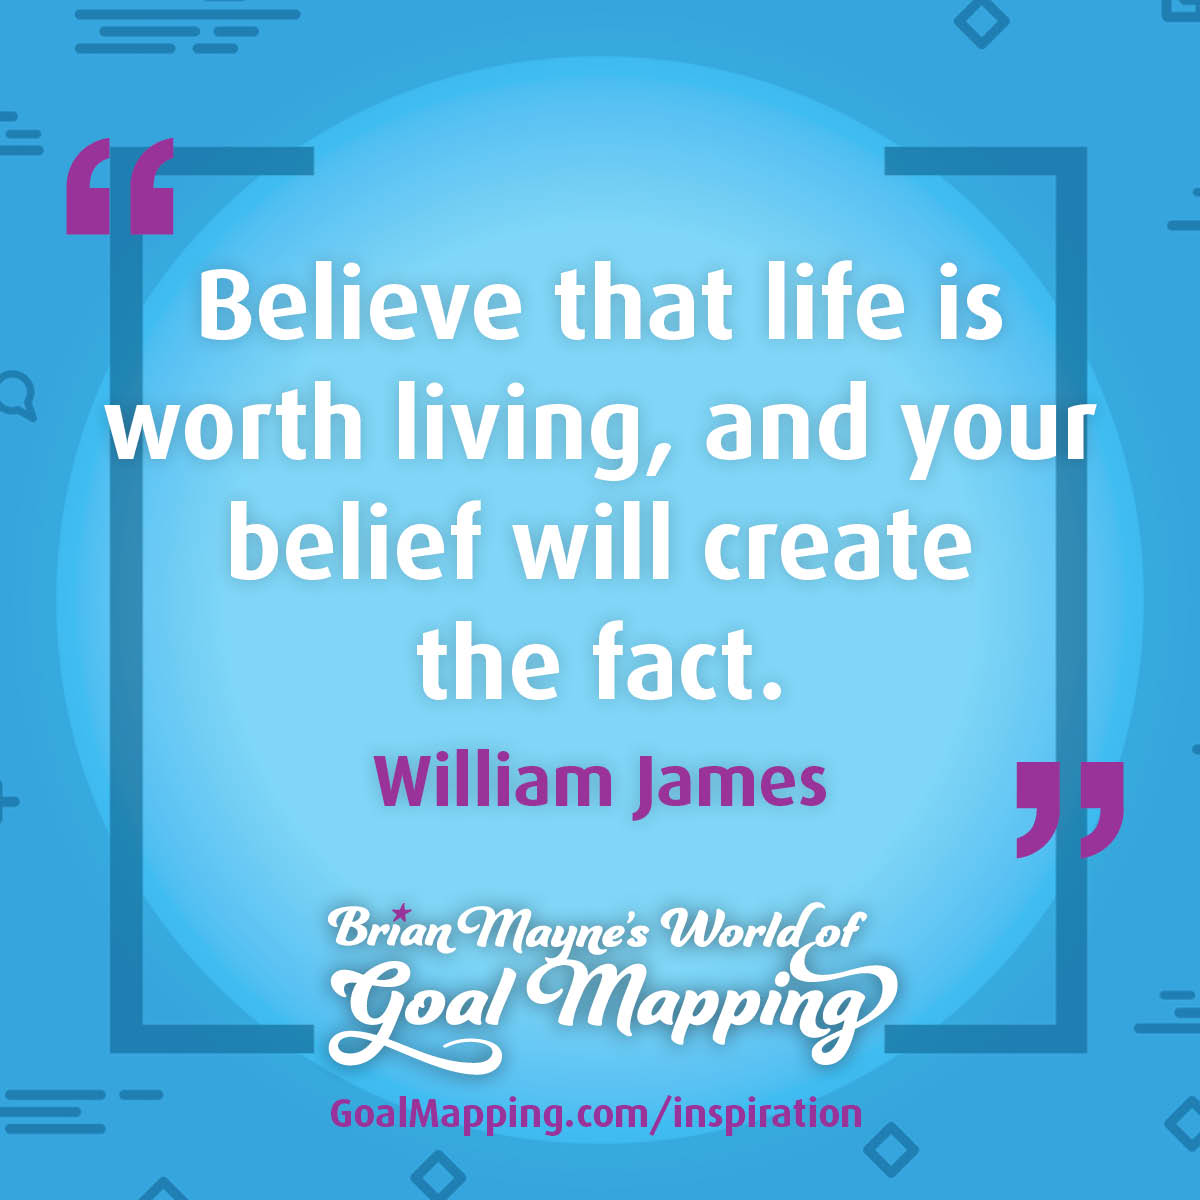 "Believe that life is worth living, and your belief will create the fact." William James